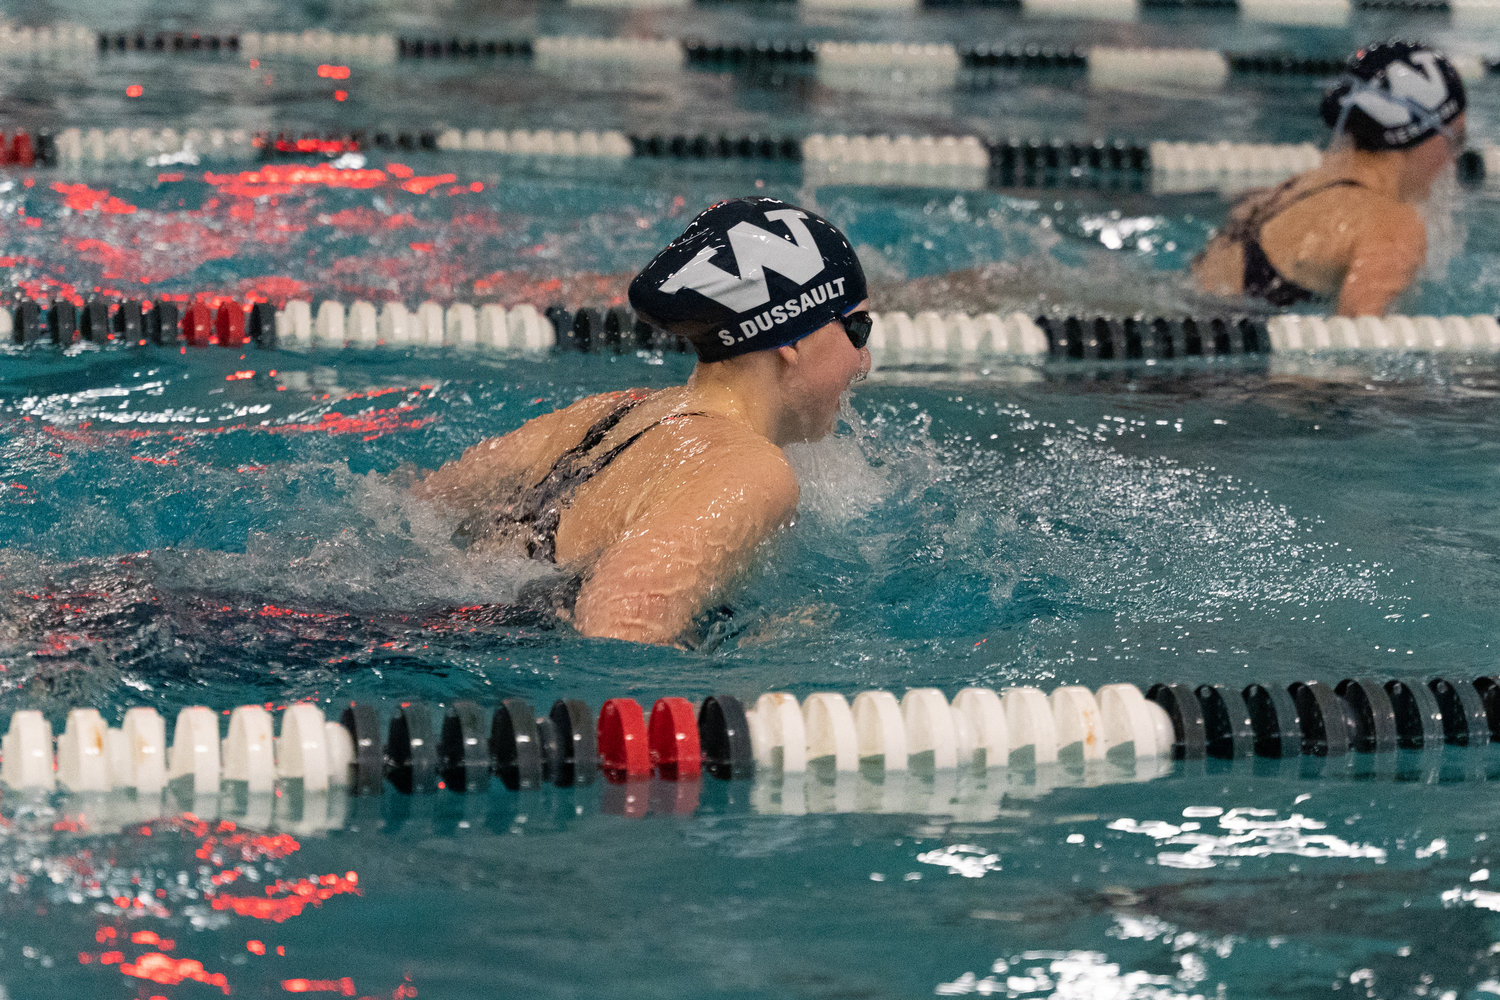 Sara Dussault qualified for states in the 100-yard breaststroke and sections in the 200-yard IM during Saturday's Cape & Islands Championships.